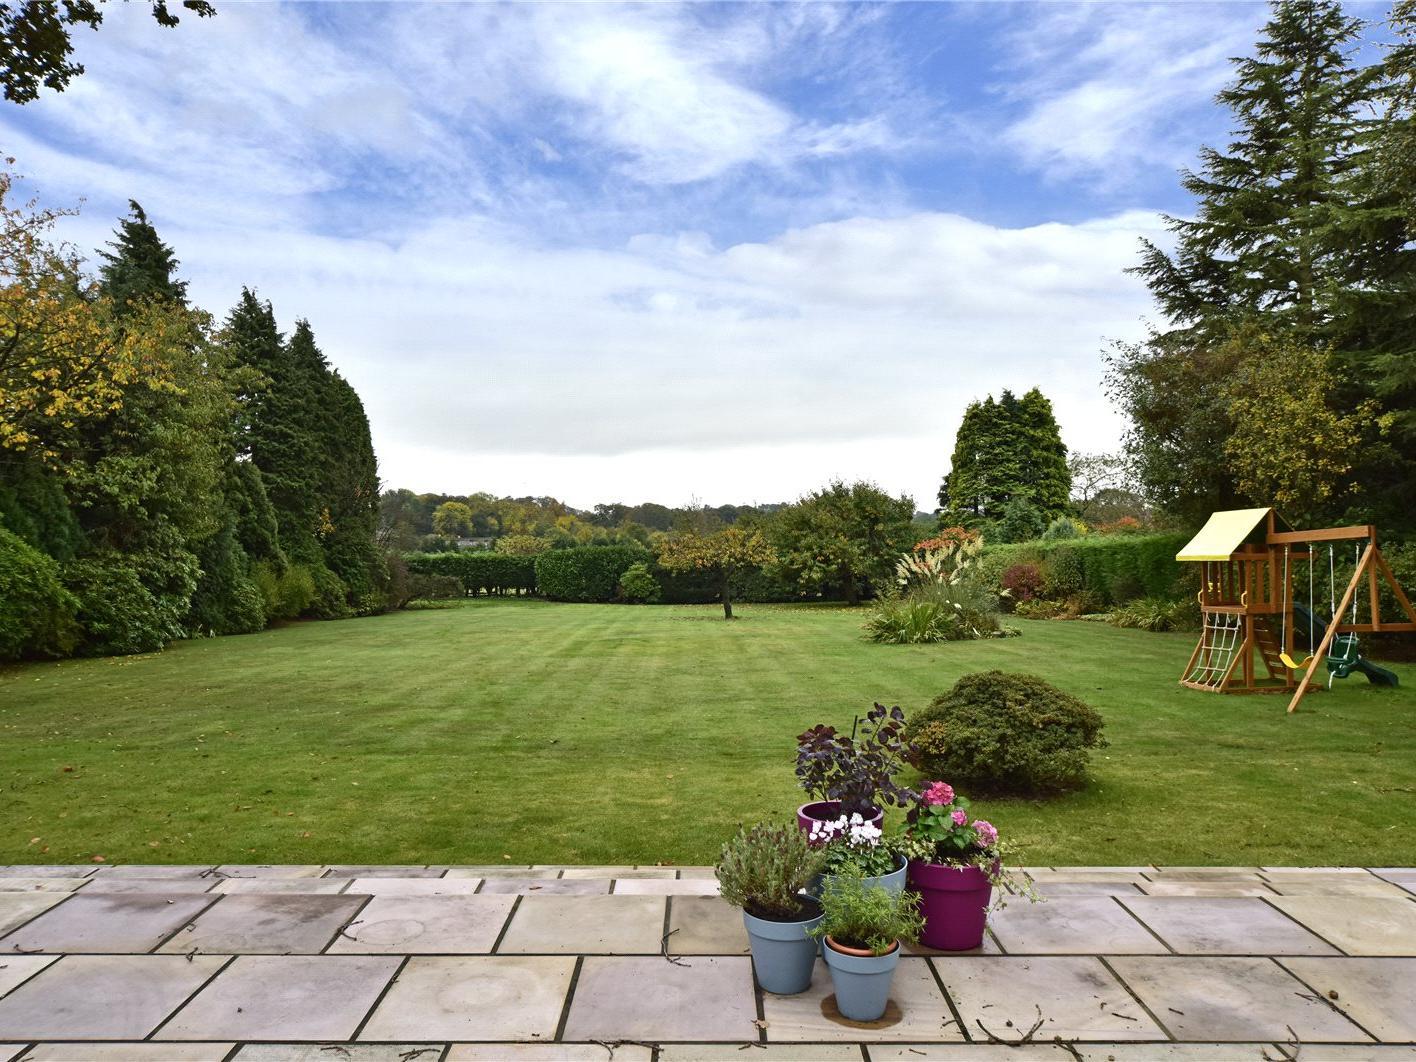 The rear one-acre garden is faced with a large paved terrace and large lawns.